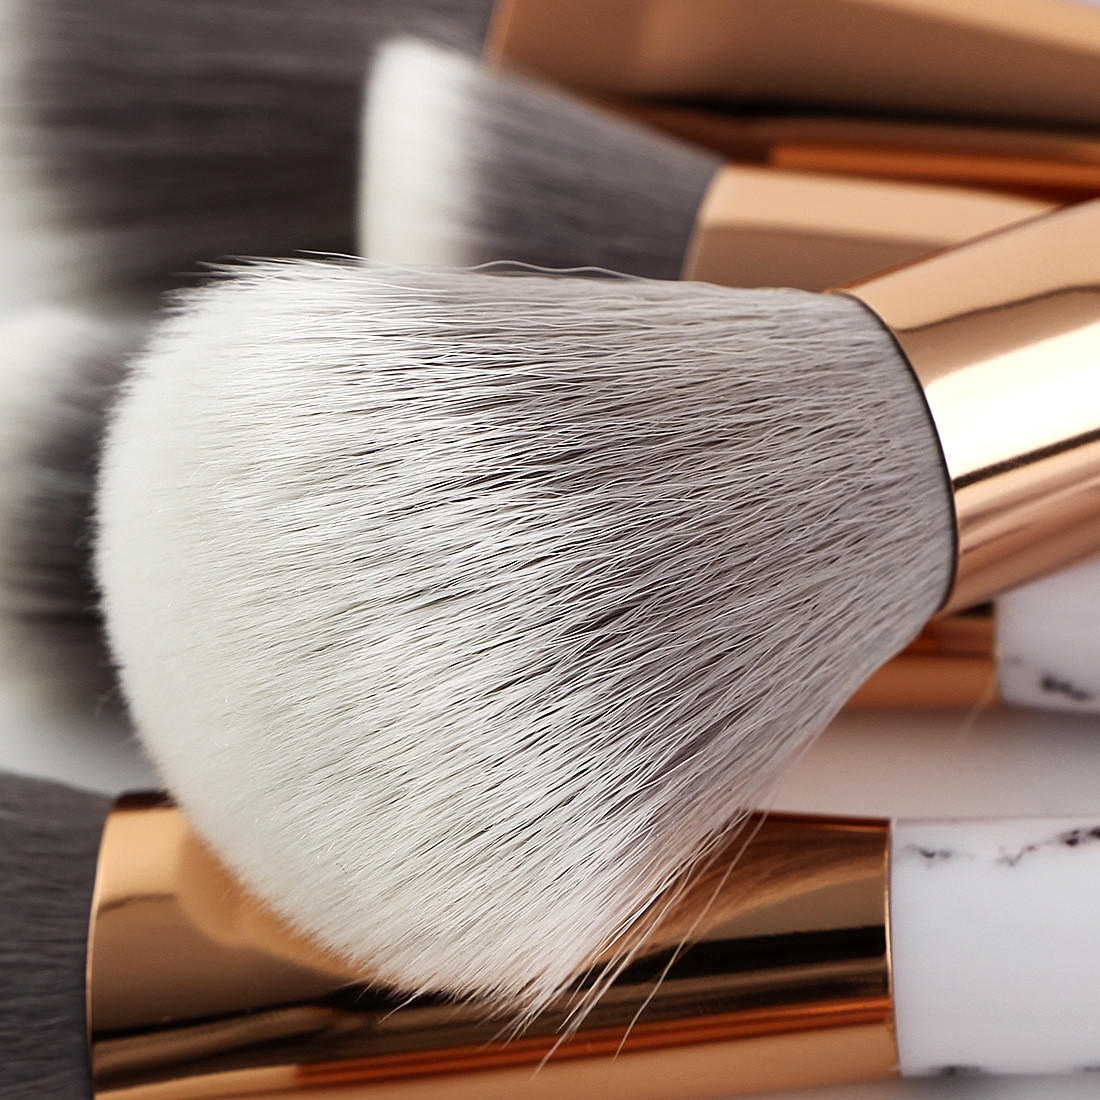 Suprabeauty best value best quality makeup brush sets from China for beauty